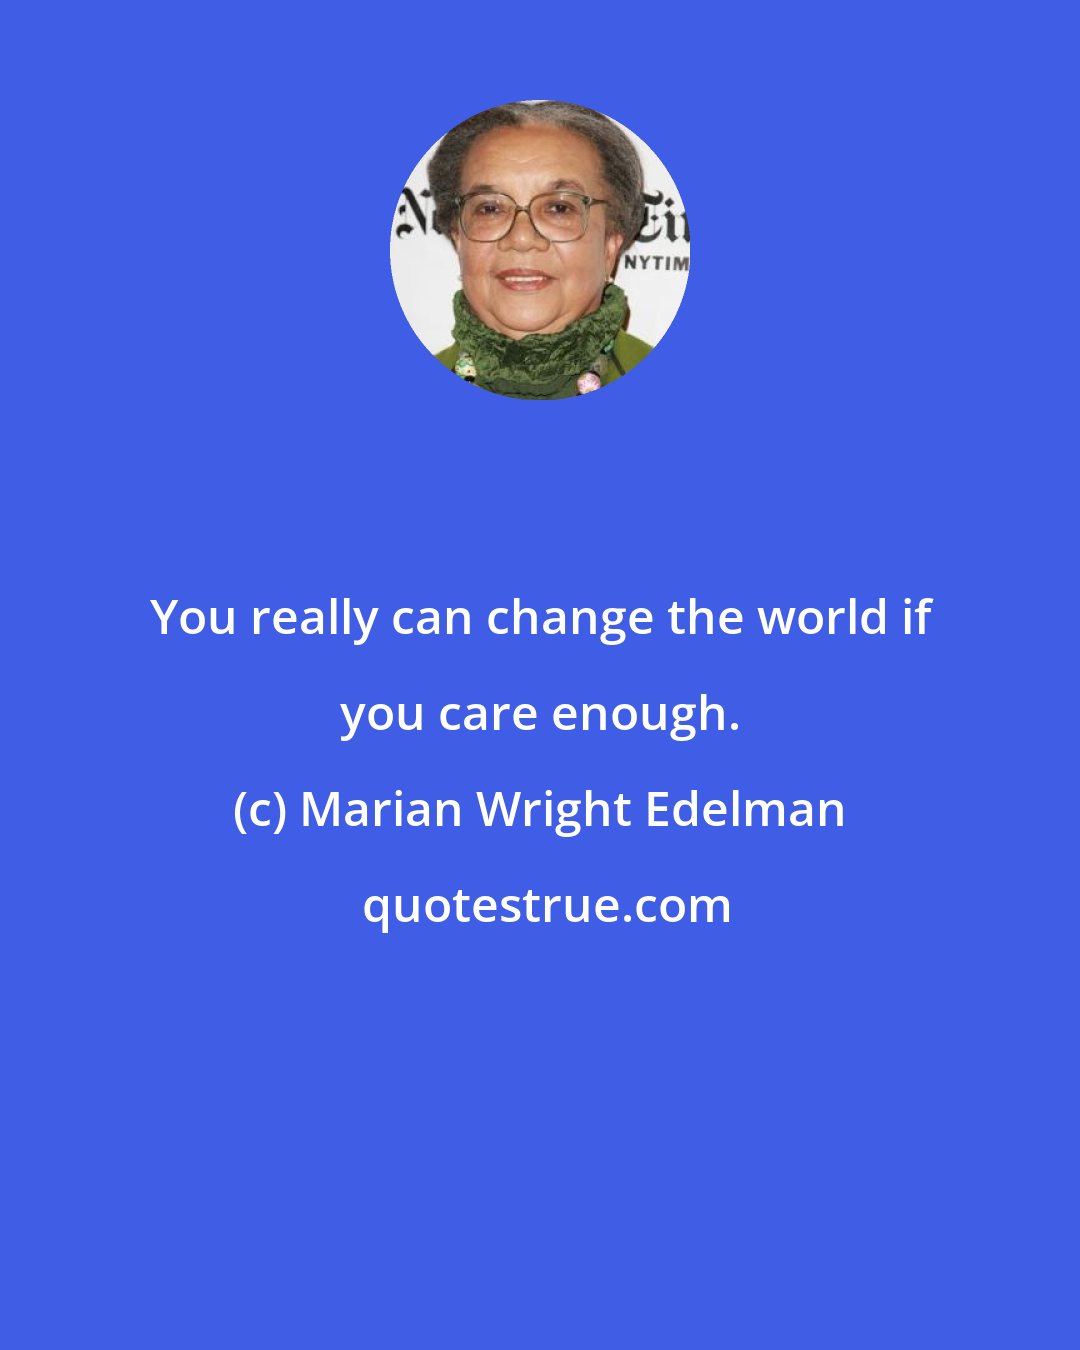 Marian Wright Edelman: You really can change the world if you care enough.